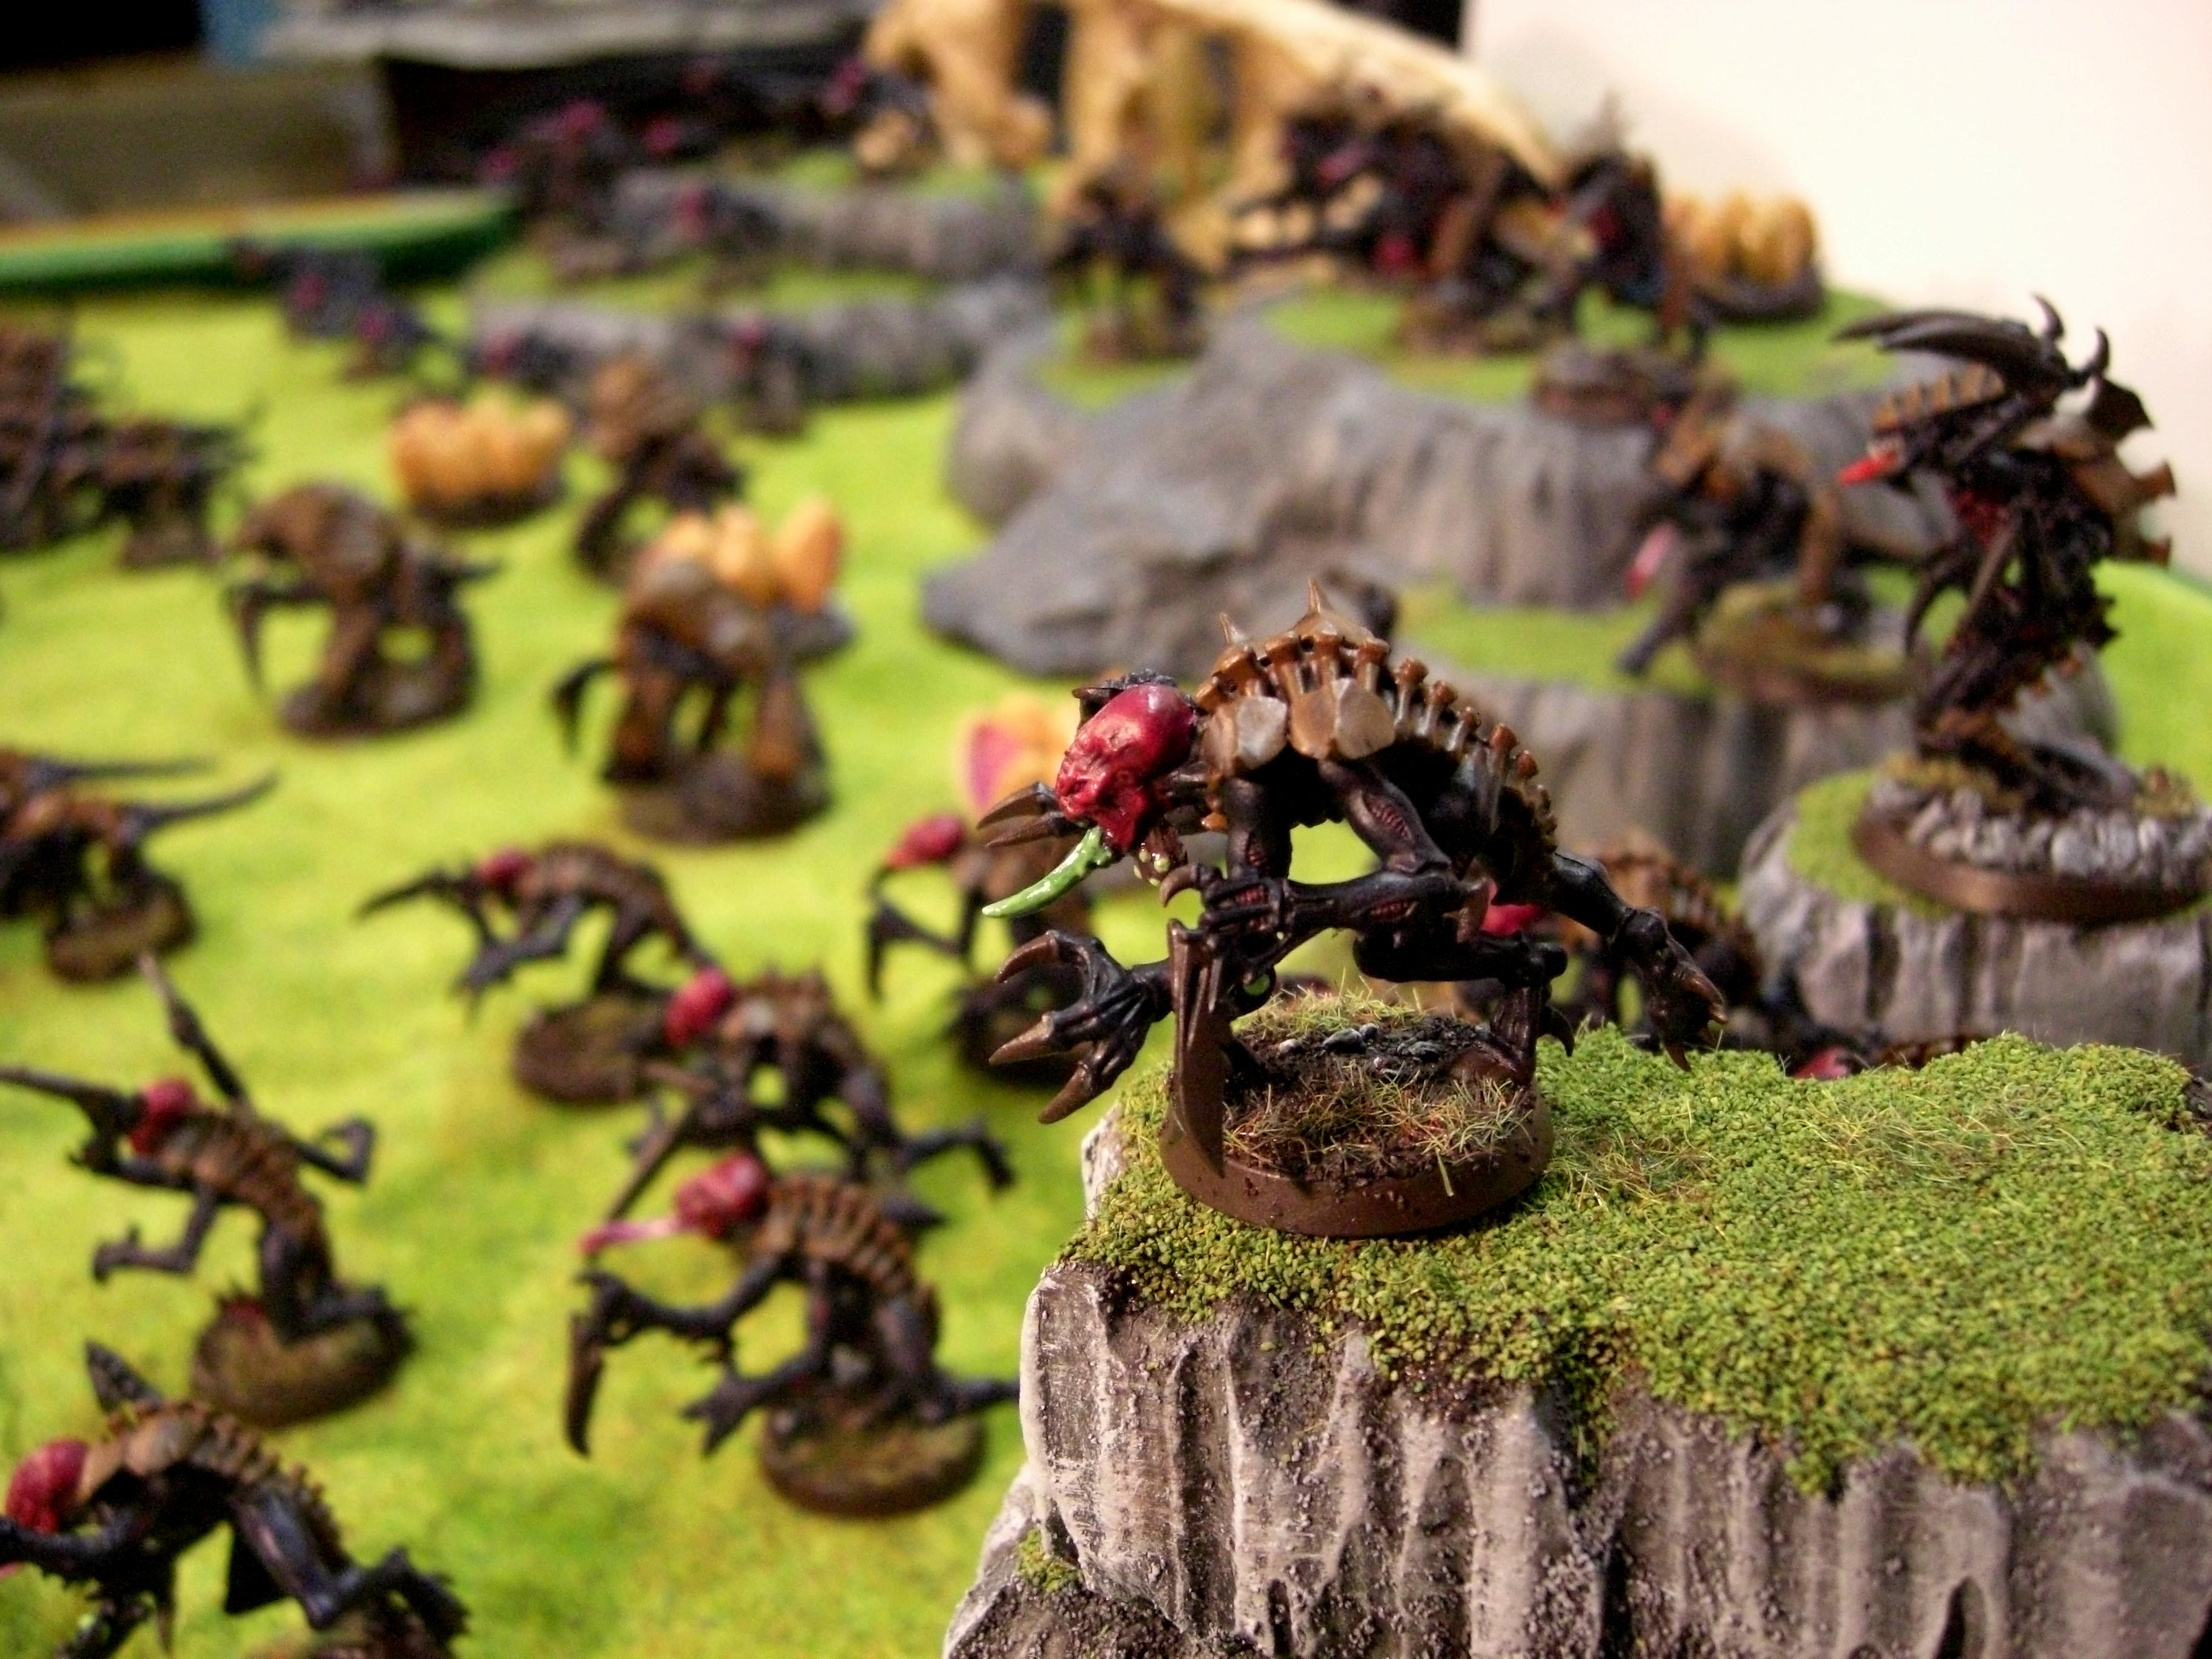 Tyranids, Stealer watching the swarm...again